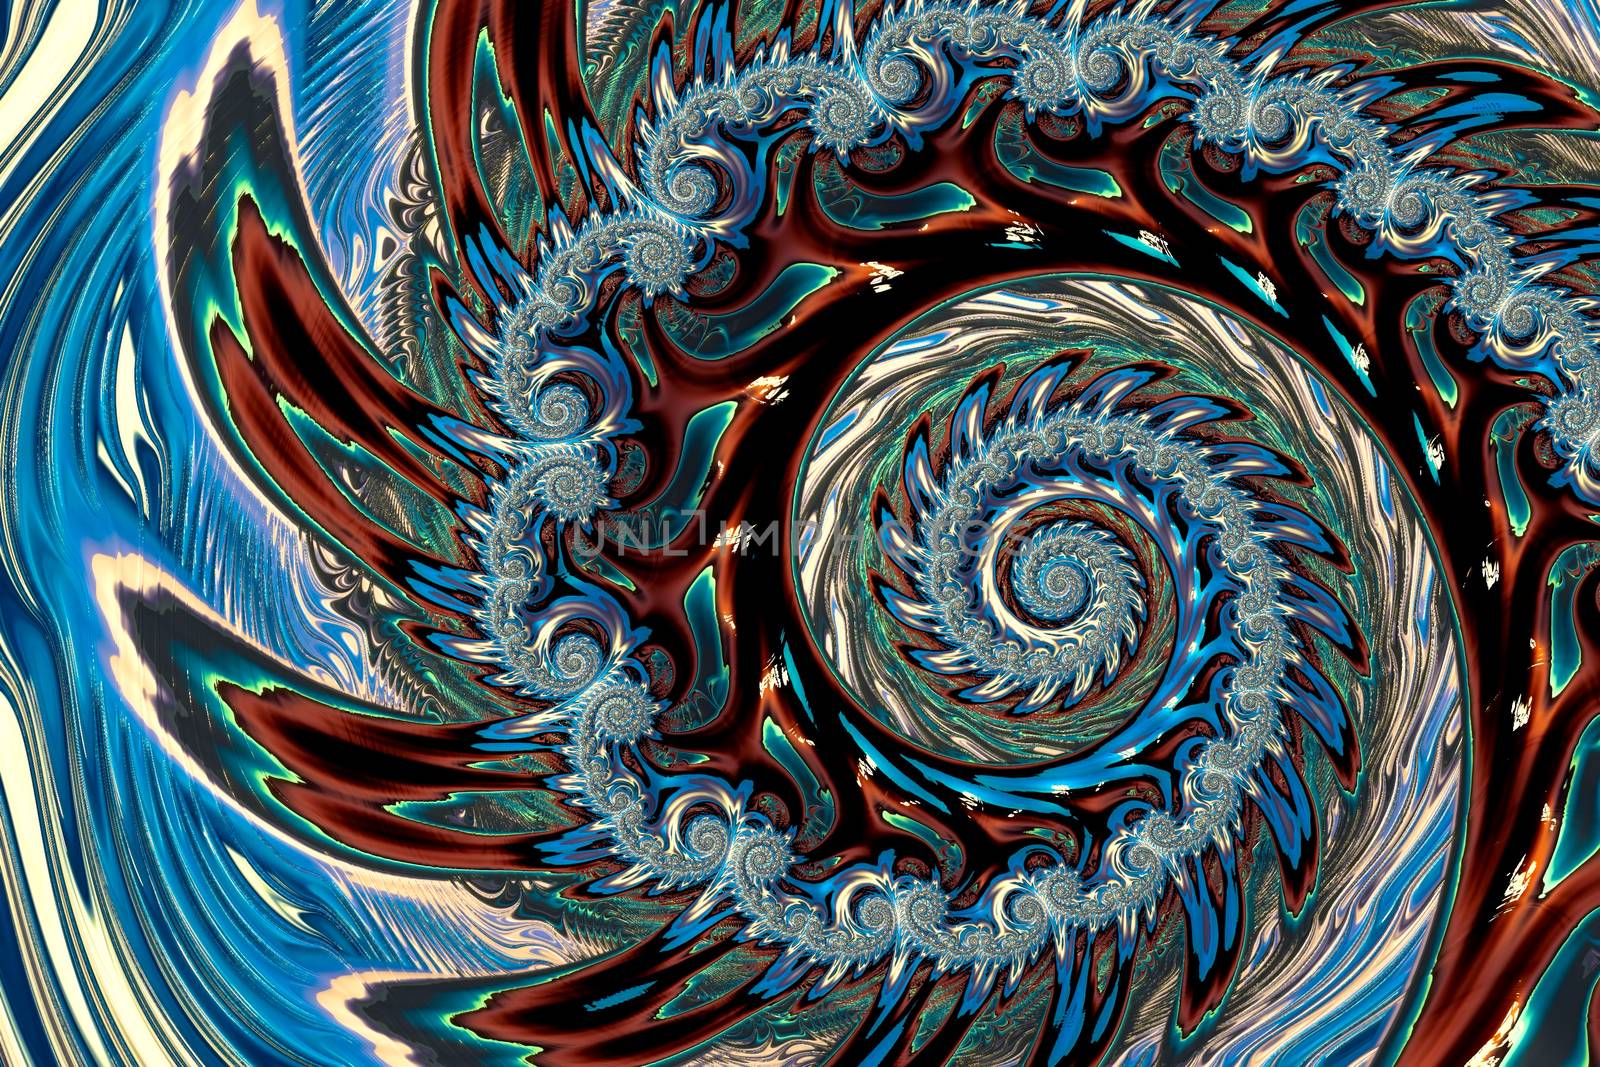 Abstract fractal spiral - computer-generated image. Fractal art: curls and repetitive spiral. Ornamental background for covers, posters, web design.